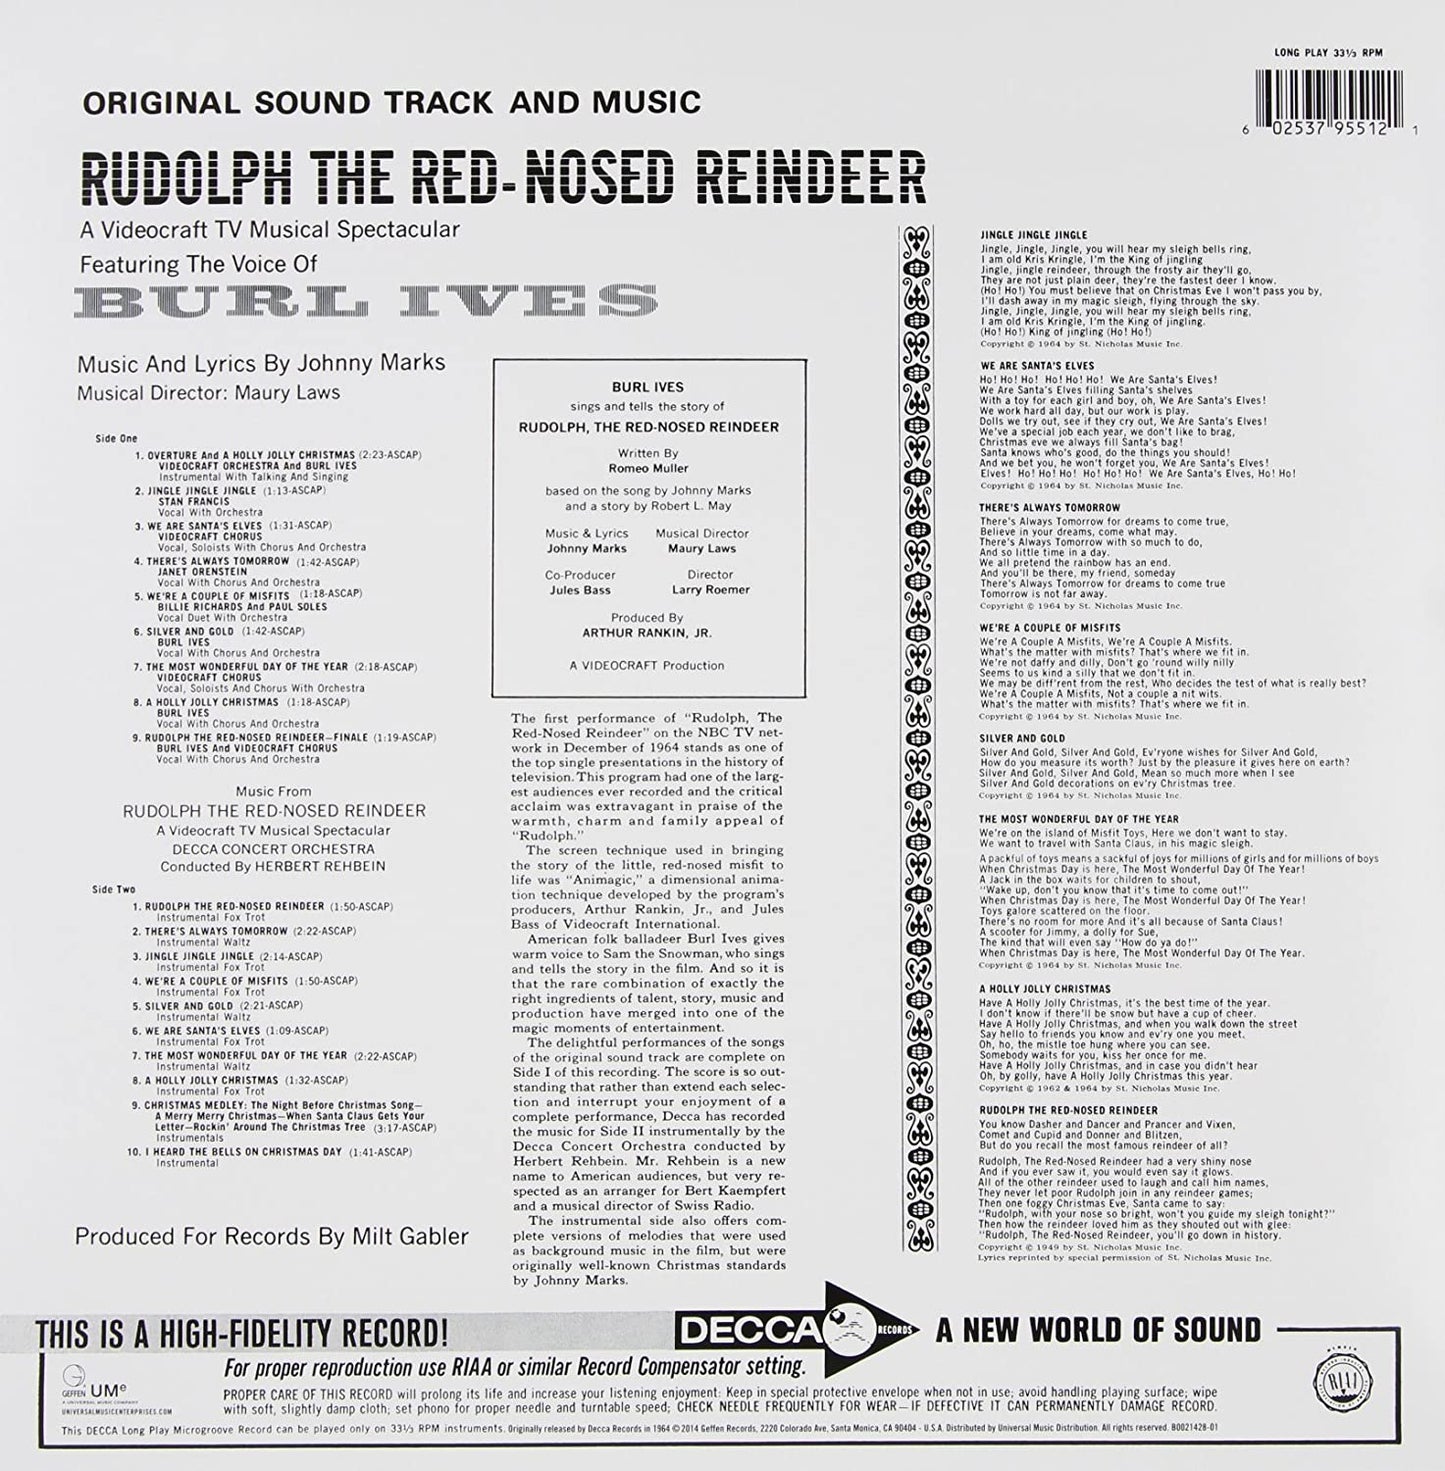 Soundtrack/Rudolph the Red Nosed Reindeer [LP]